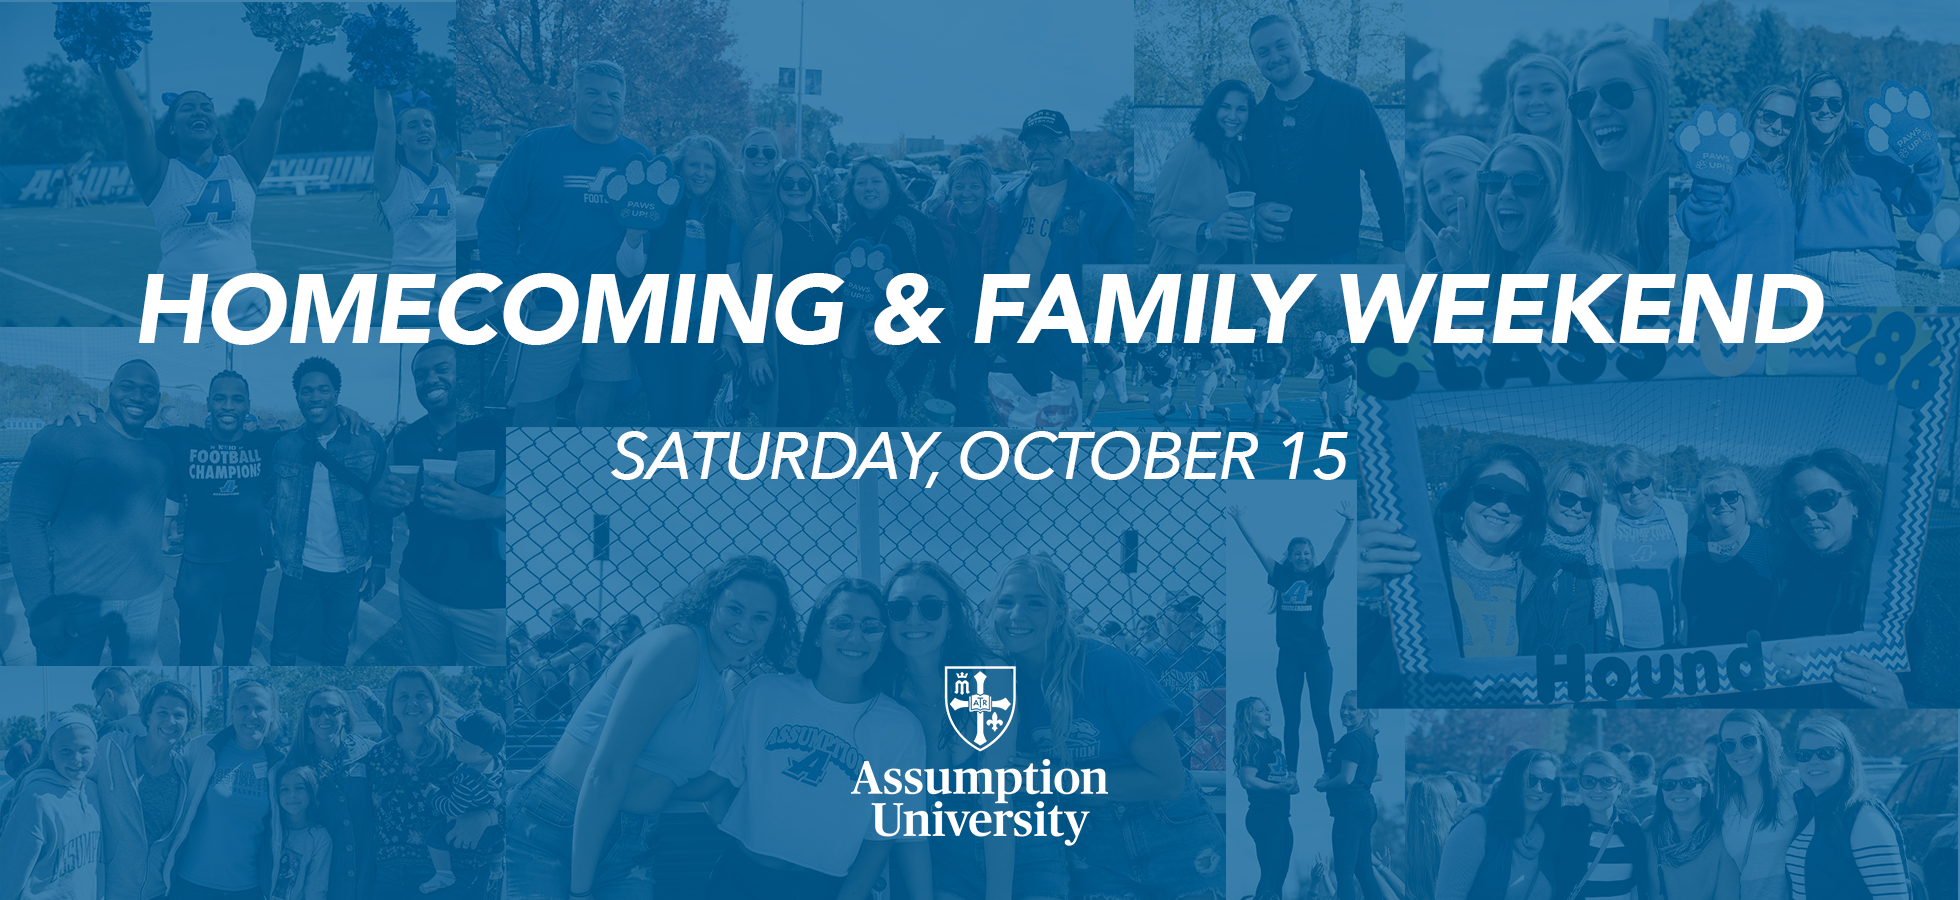 Assumption Homecoming & Family Weekend is Scheduled for Saturday, October 15, 2022